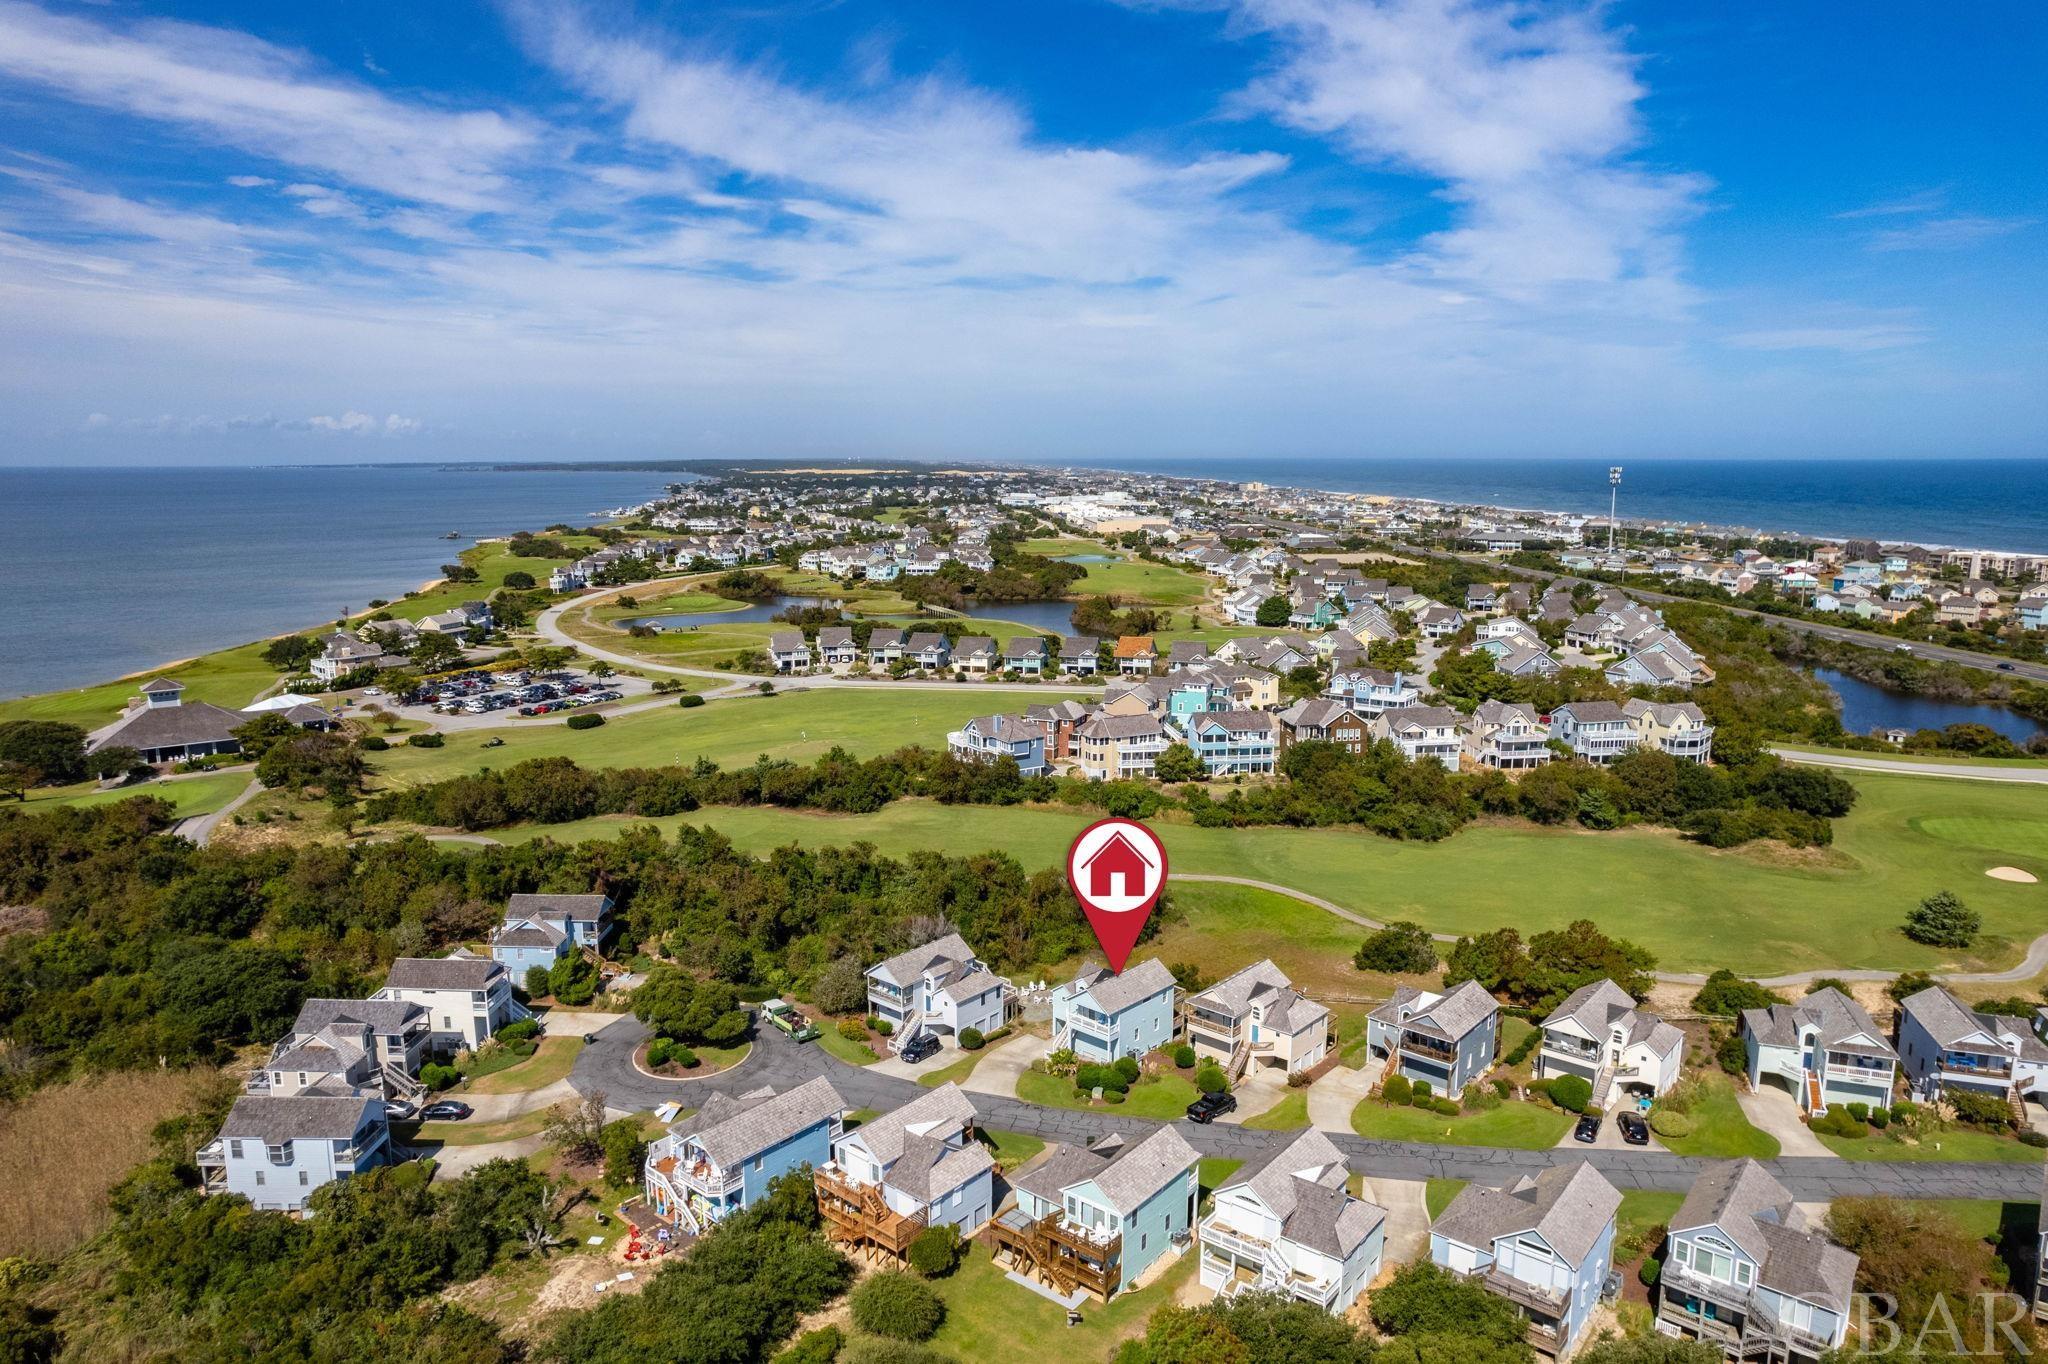 122 Marsh Cove Drive, Nags Head, NC 27959, 3 Bedrooms Bedrooms, ,2 BathroomsBathrooms,Residential,For sale,Marsh Cove Drive,124003